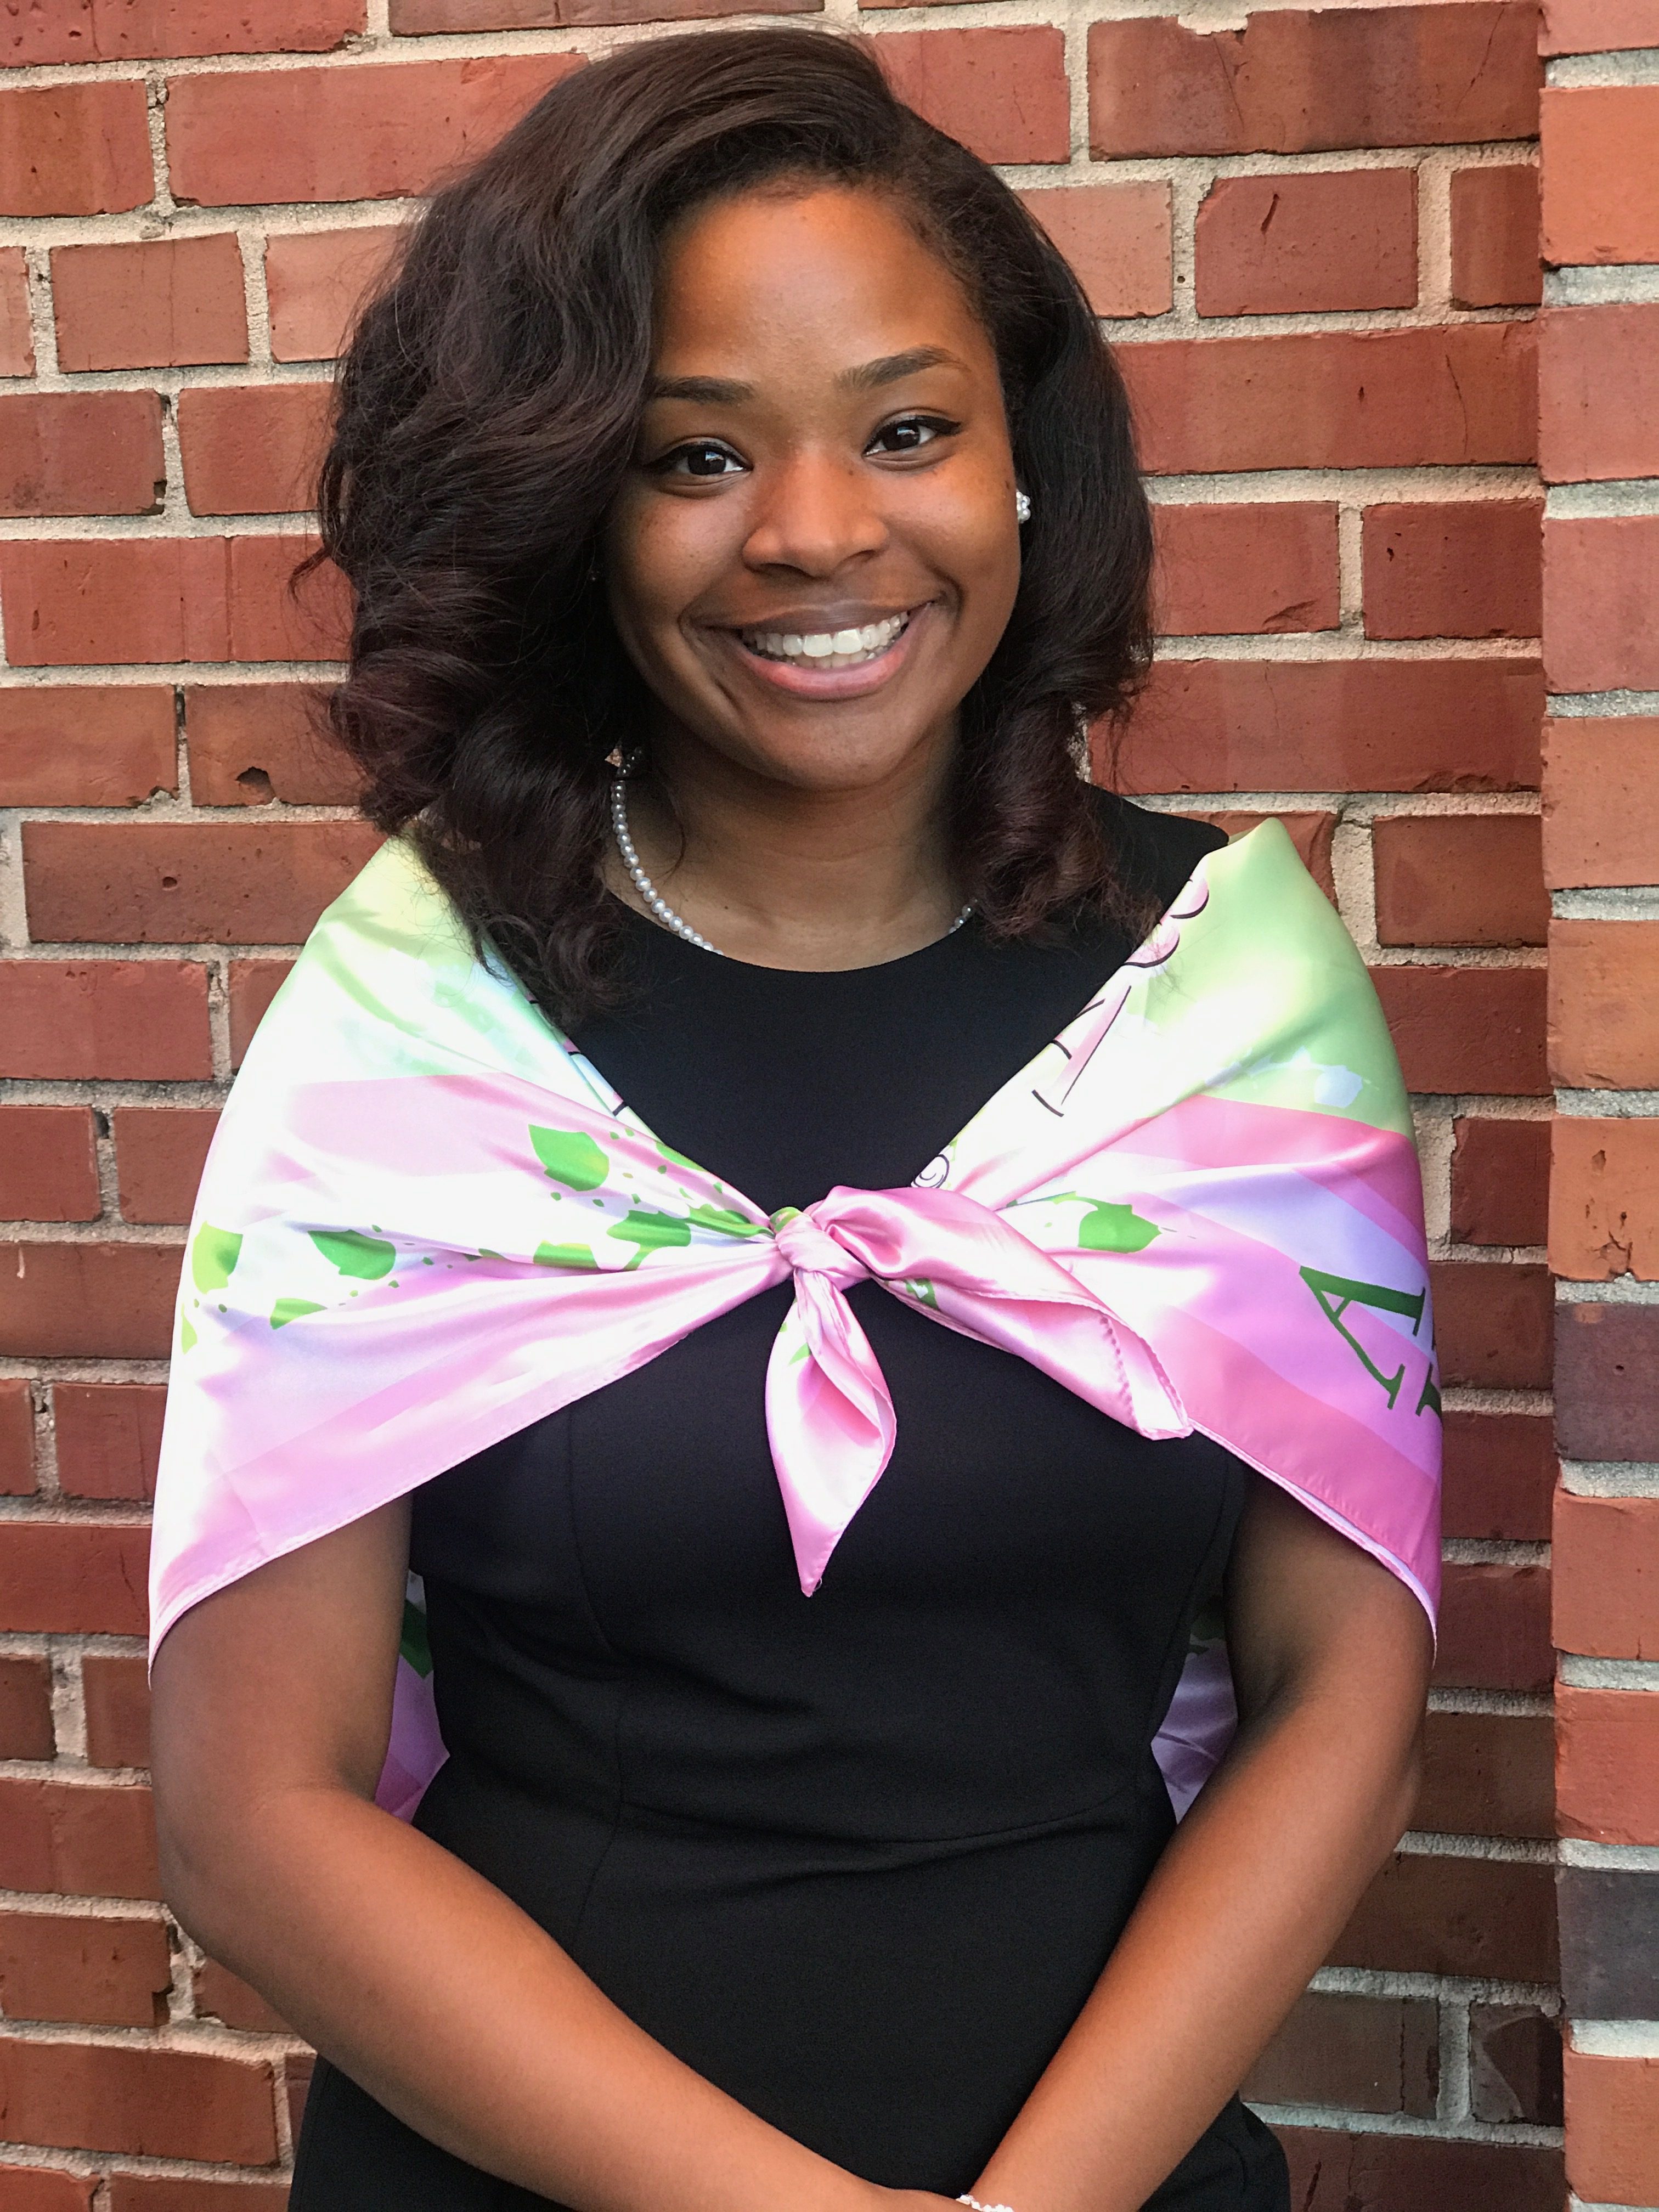 Ila Wilborn is committed to serving her community as a member of Alpha Kappa Alpha Sorority, Inc.